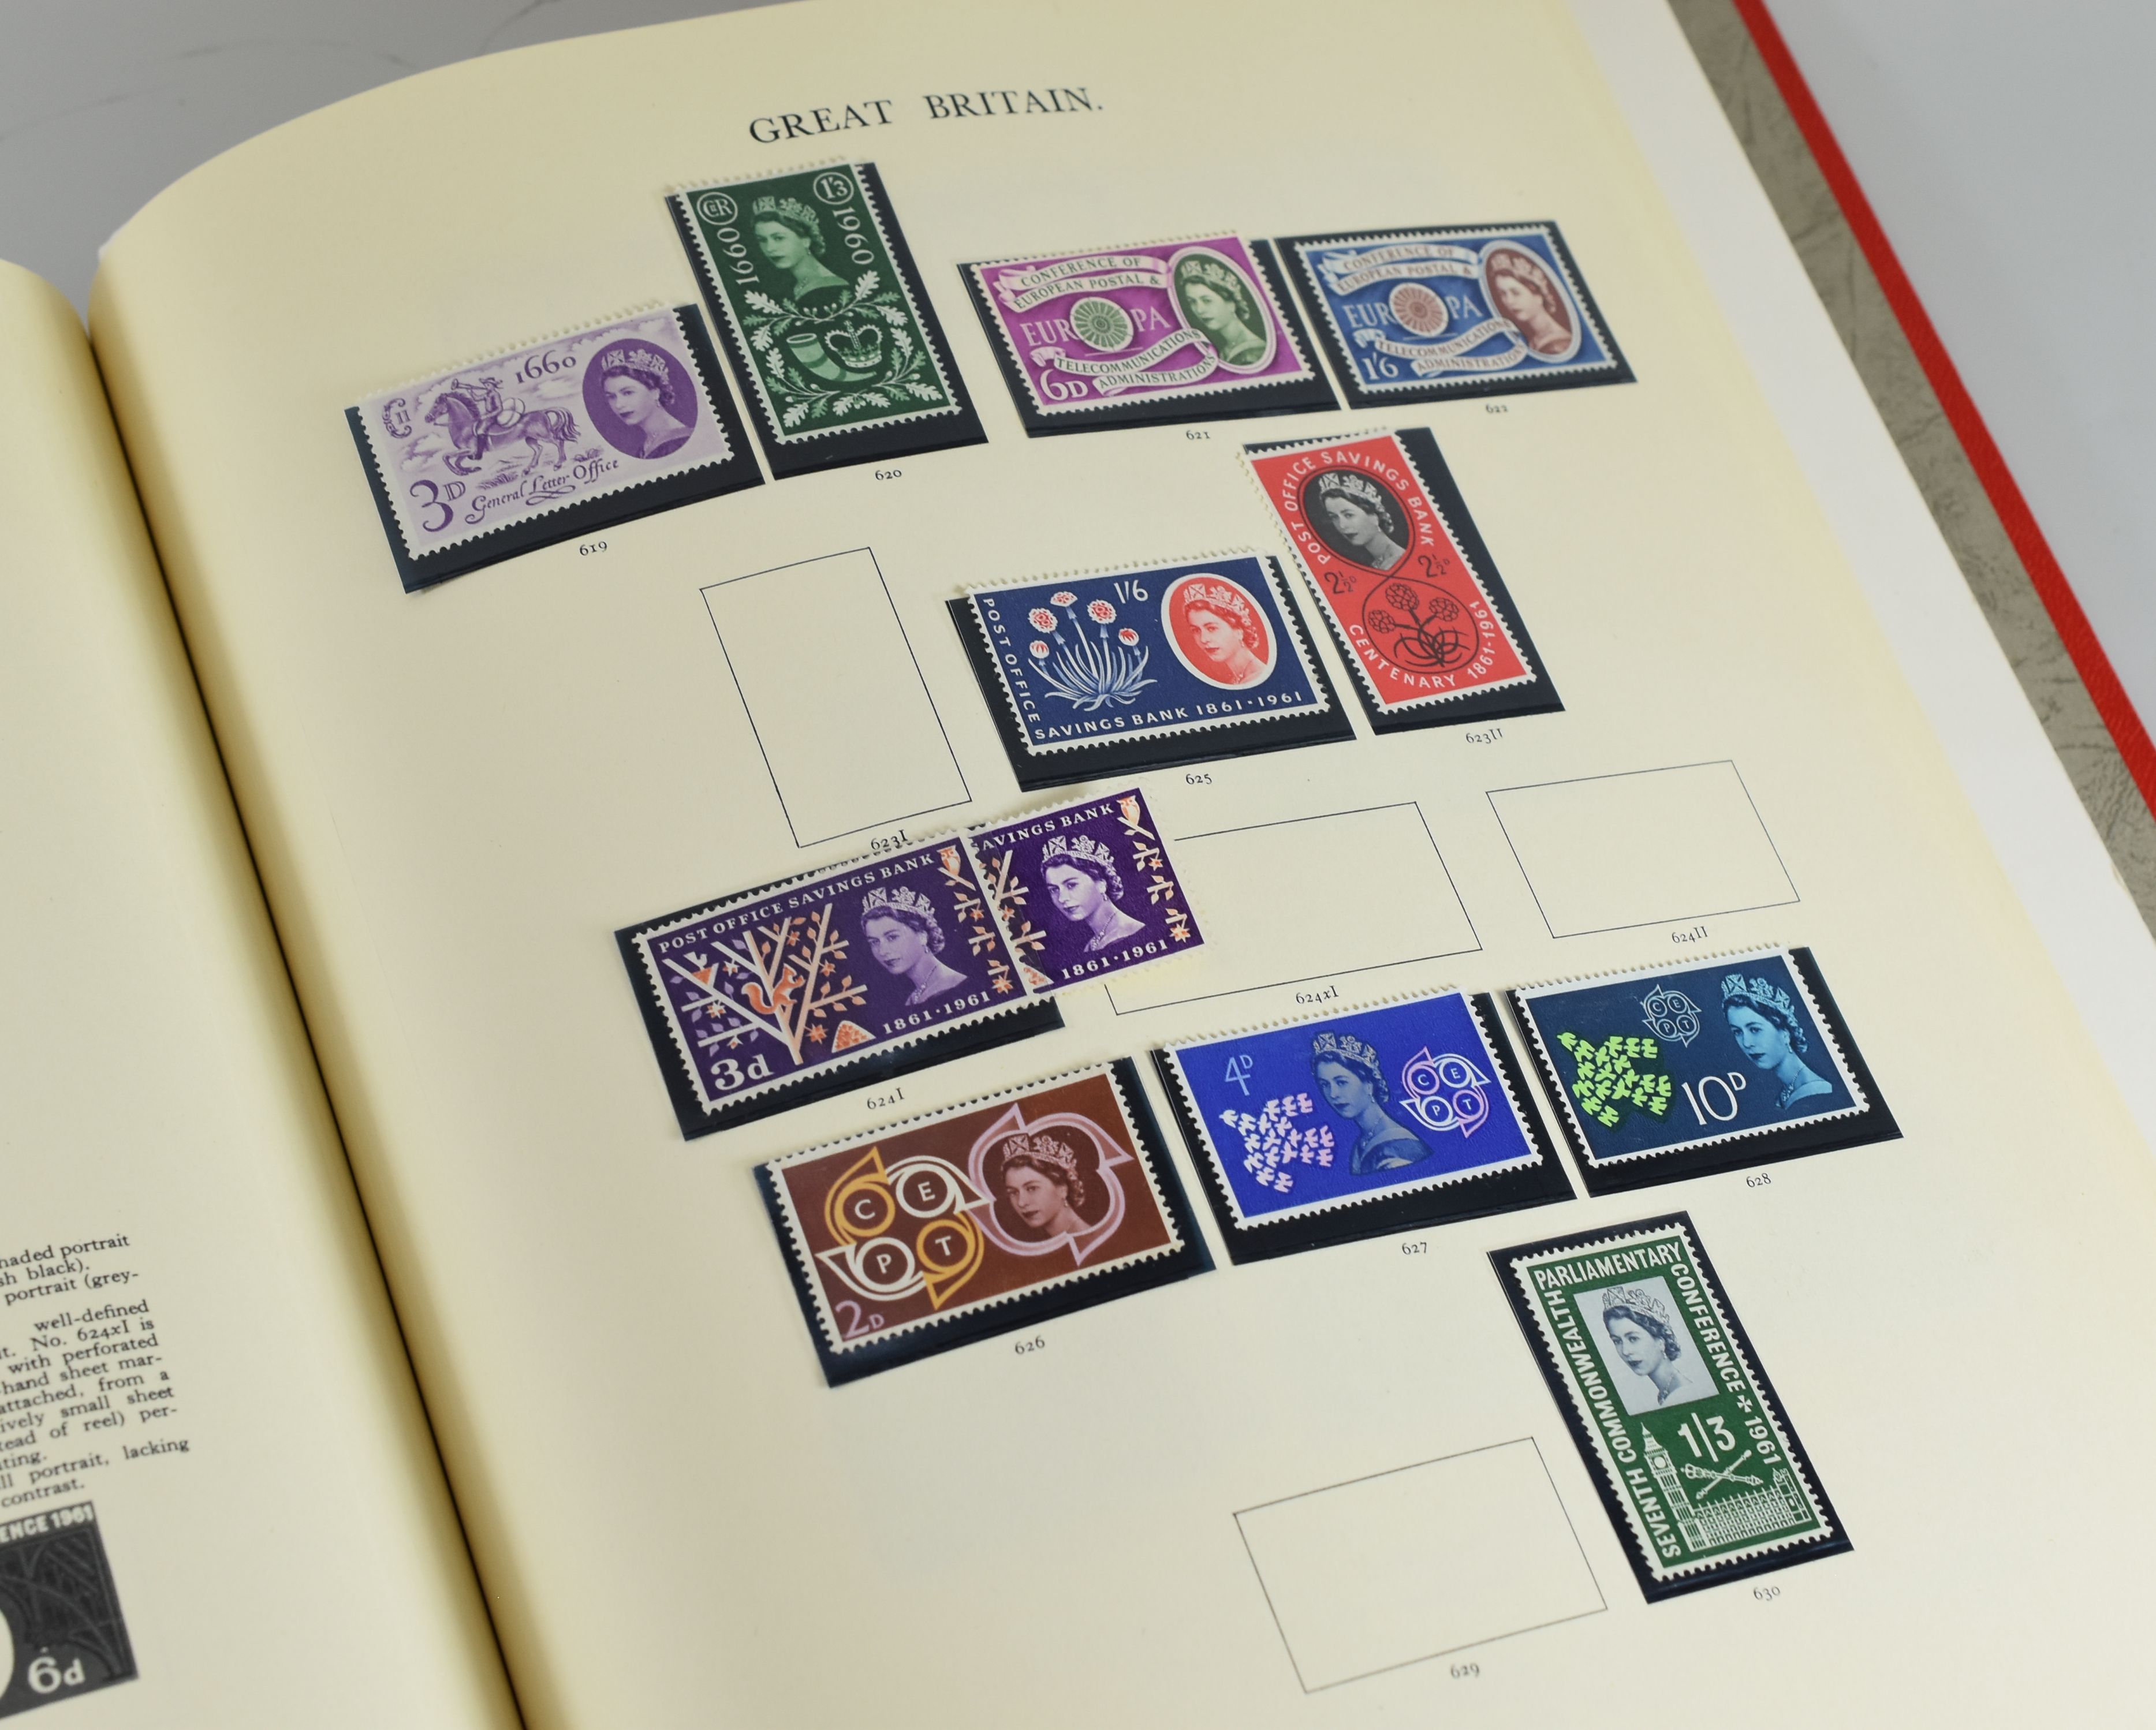 A RED WINDSOR ALBUM OF GREAT BRITAIN USED STAMPS mainly Elizabeth II & TWO PURPLE ALBUMS OF ROYAL